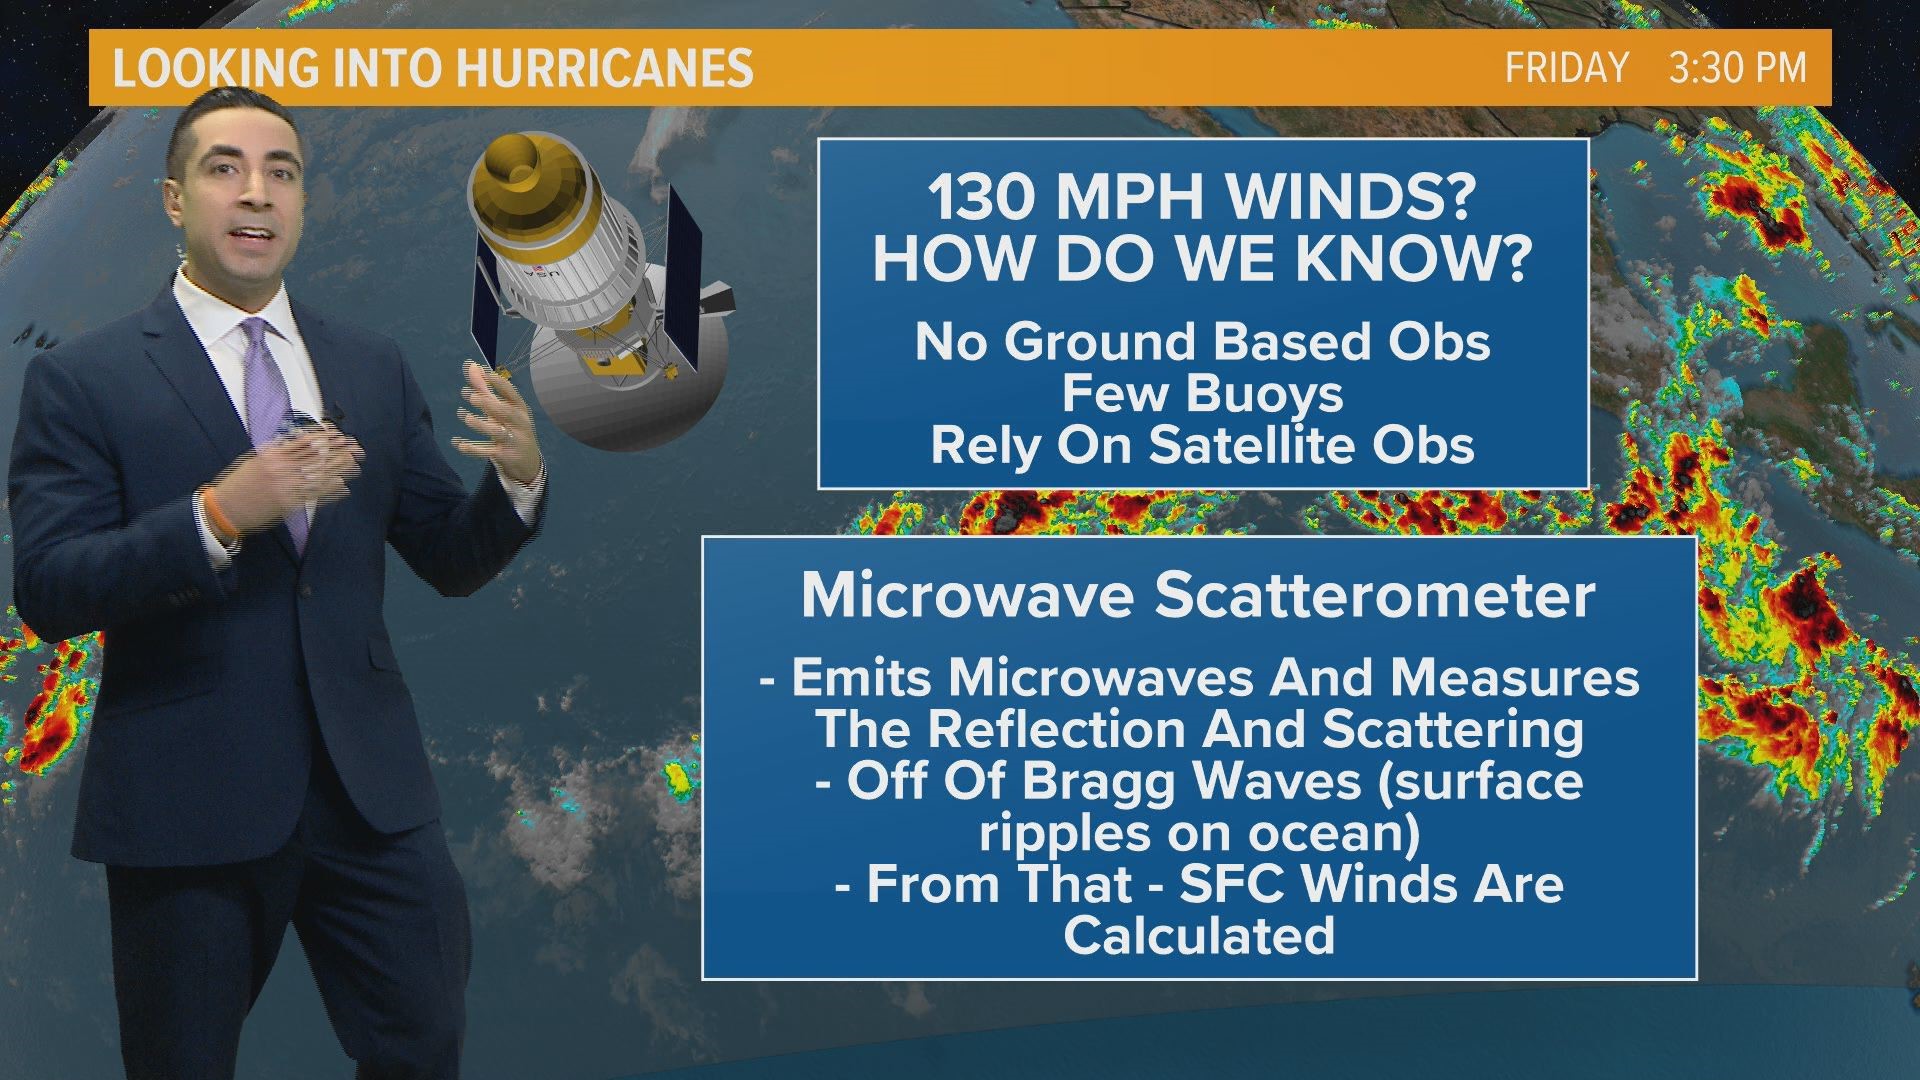 How do we know wind speeds of a hurricane or tropical storm in the middle of the ocean?